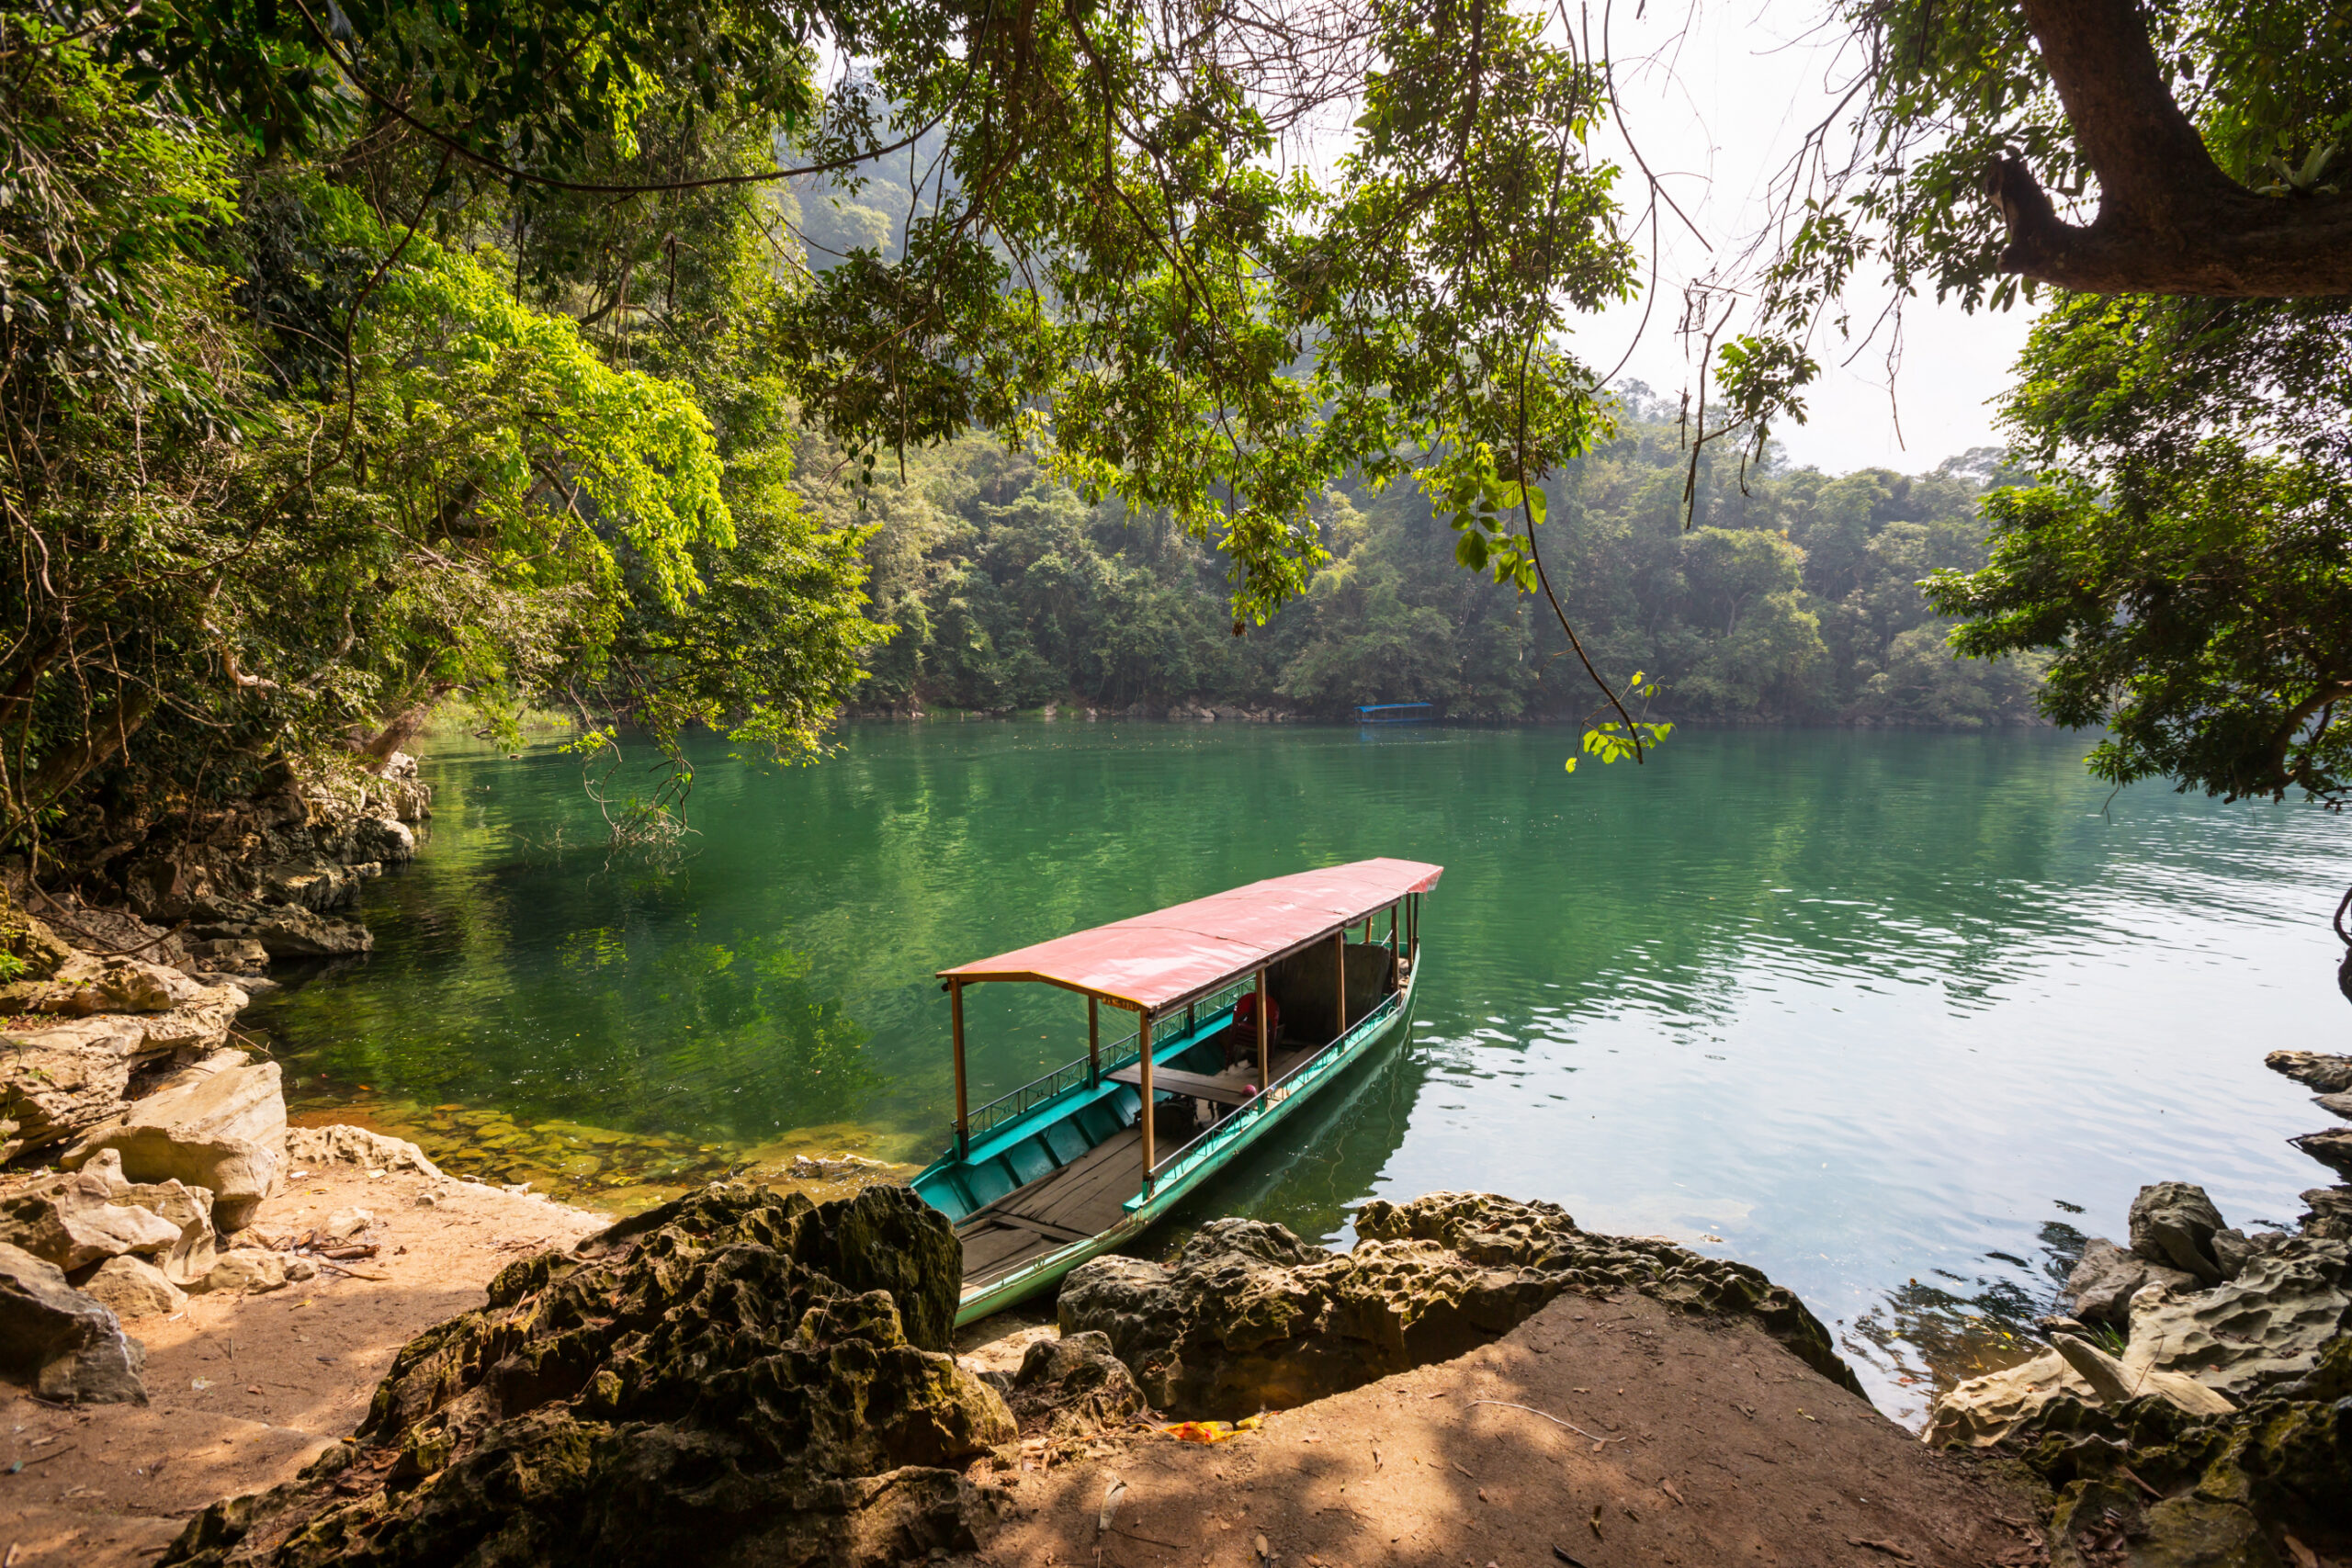 Top 10 Tourist Attractions in Vietnam, Ba Be National Park